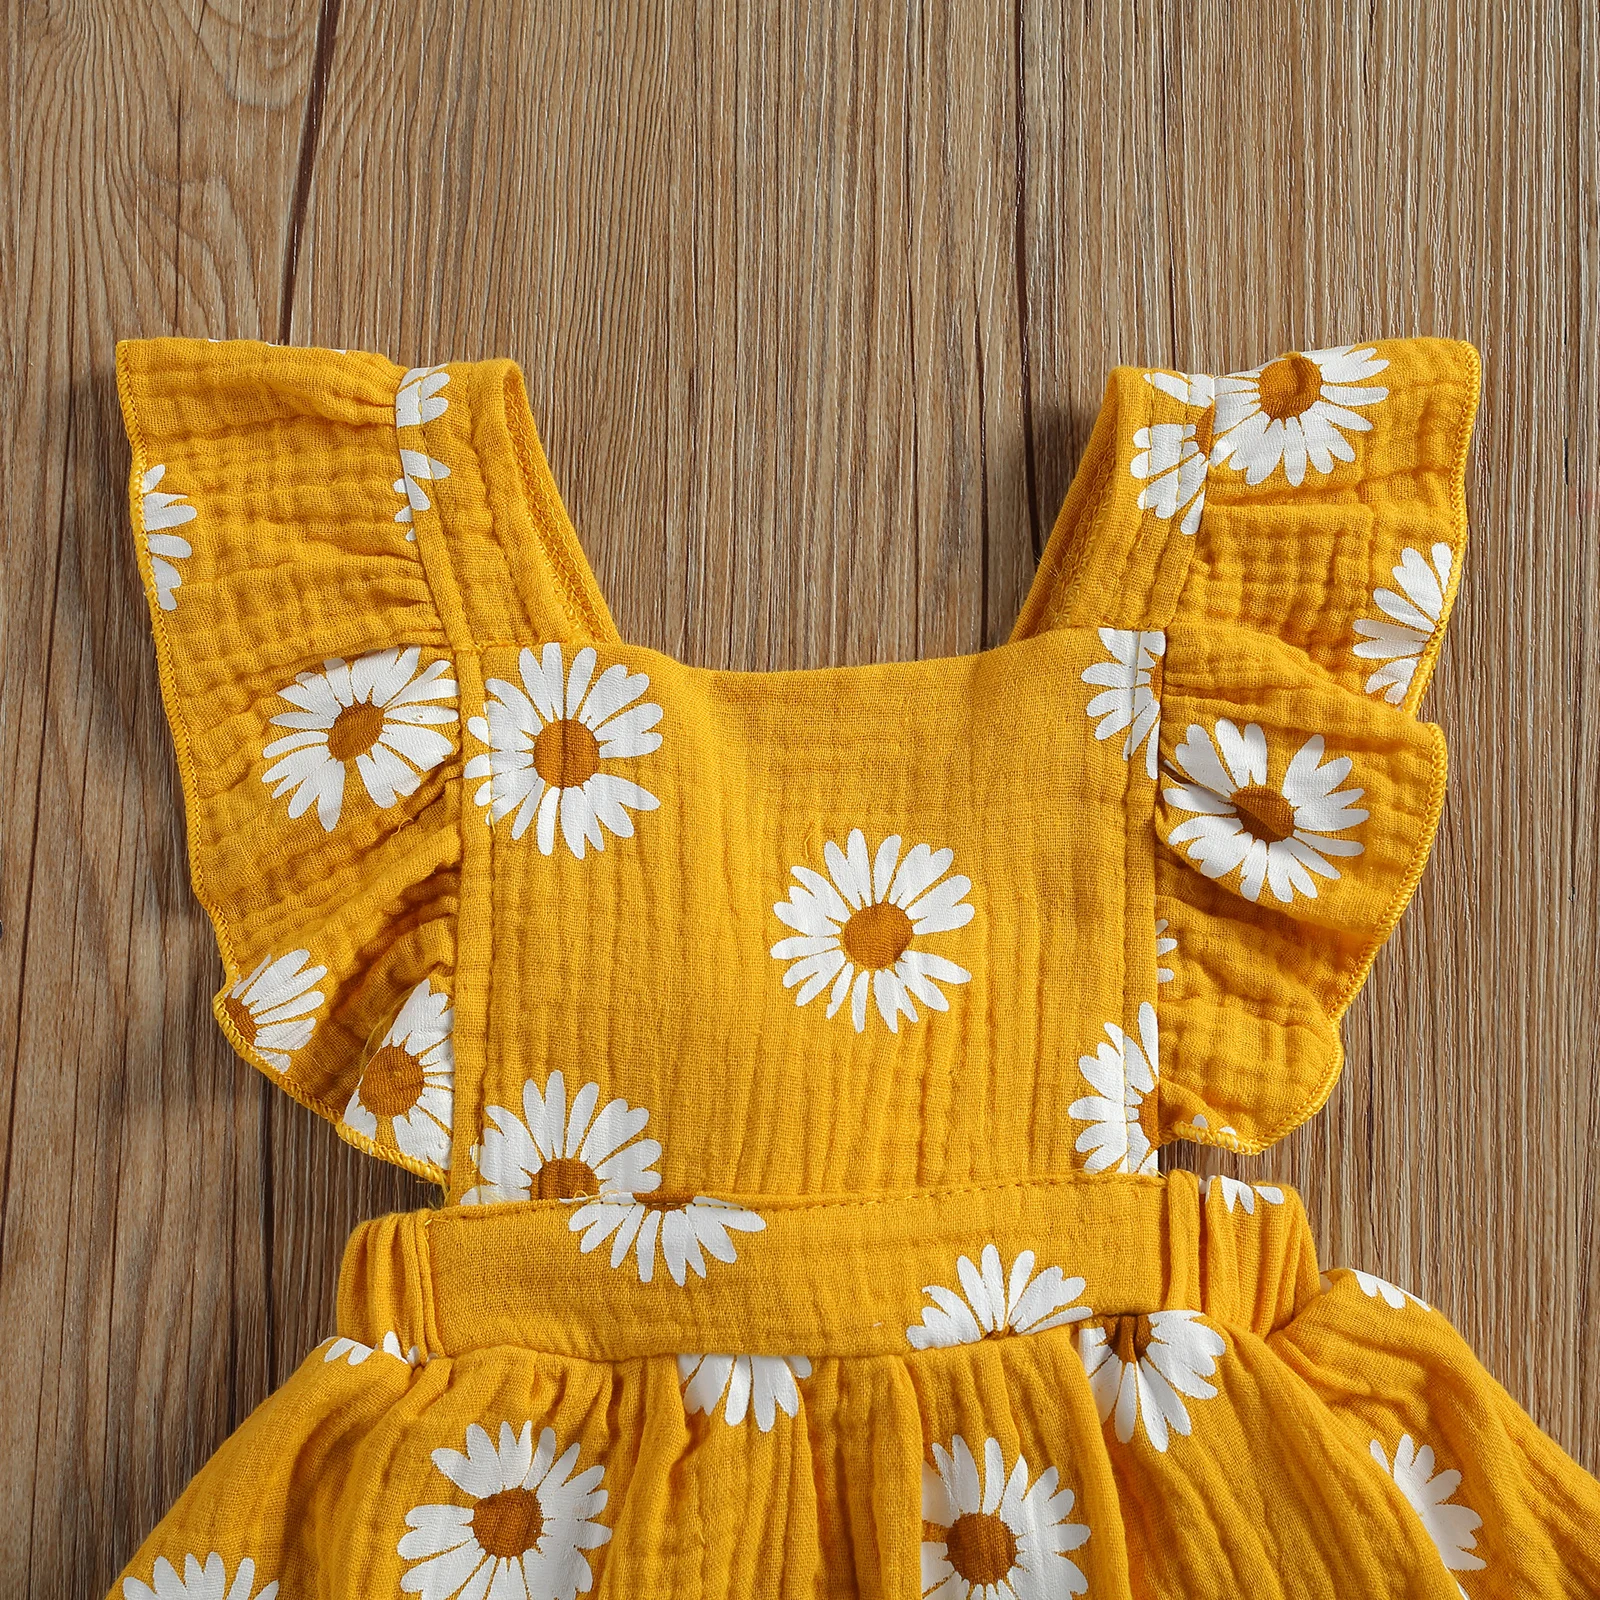 0-24M  Newborn Baby Girls Ruffle daisy r Romper Backcross Jumpsuit +Headband Outfits Sunsuit Baby Clothing Baby Bodysuits are cool